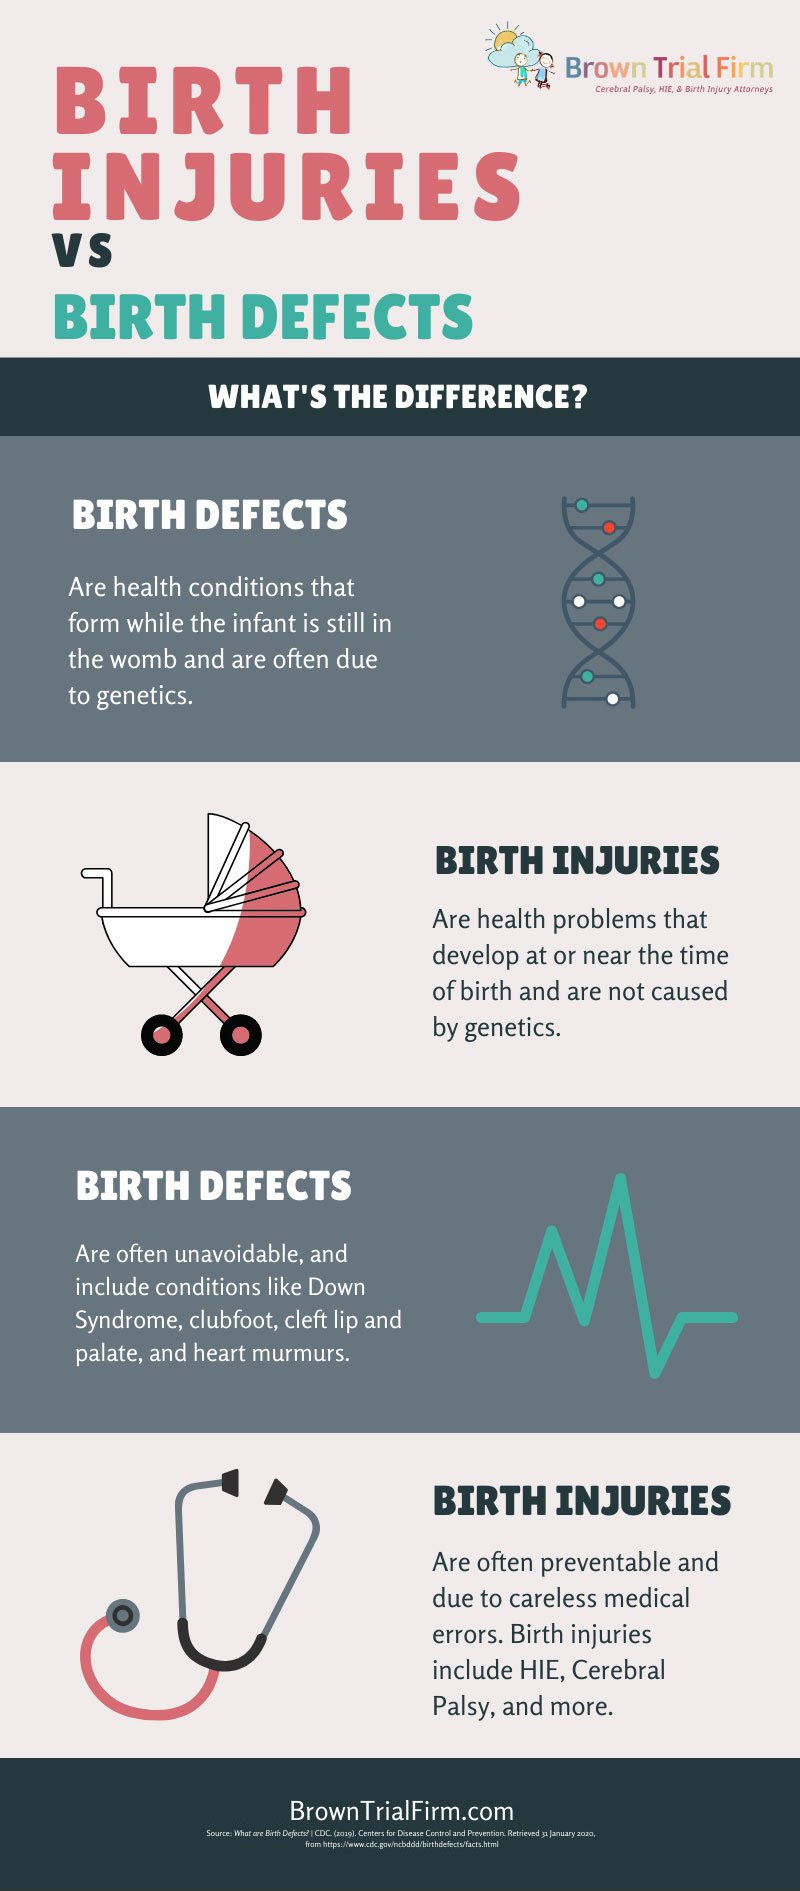 Birth Injuries vs Birth Defects – What’s the Difference?